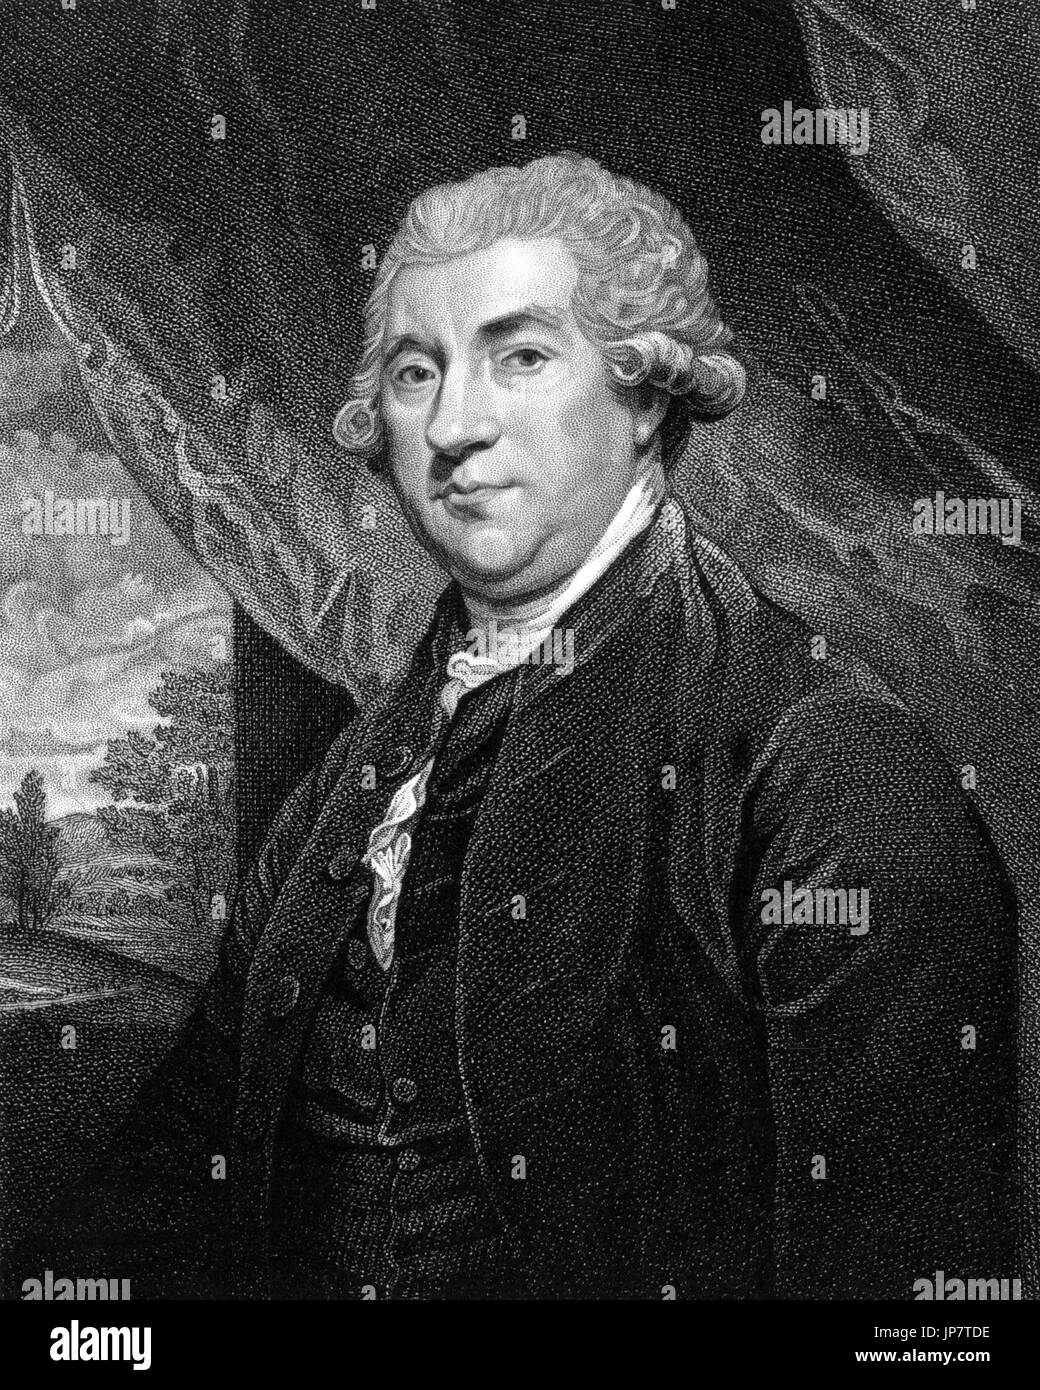 James Boswell, 9th Laird of Auchinleck (1740-1795), 1880 engraving from ...